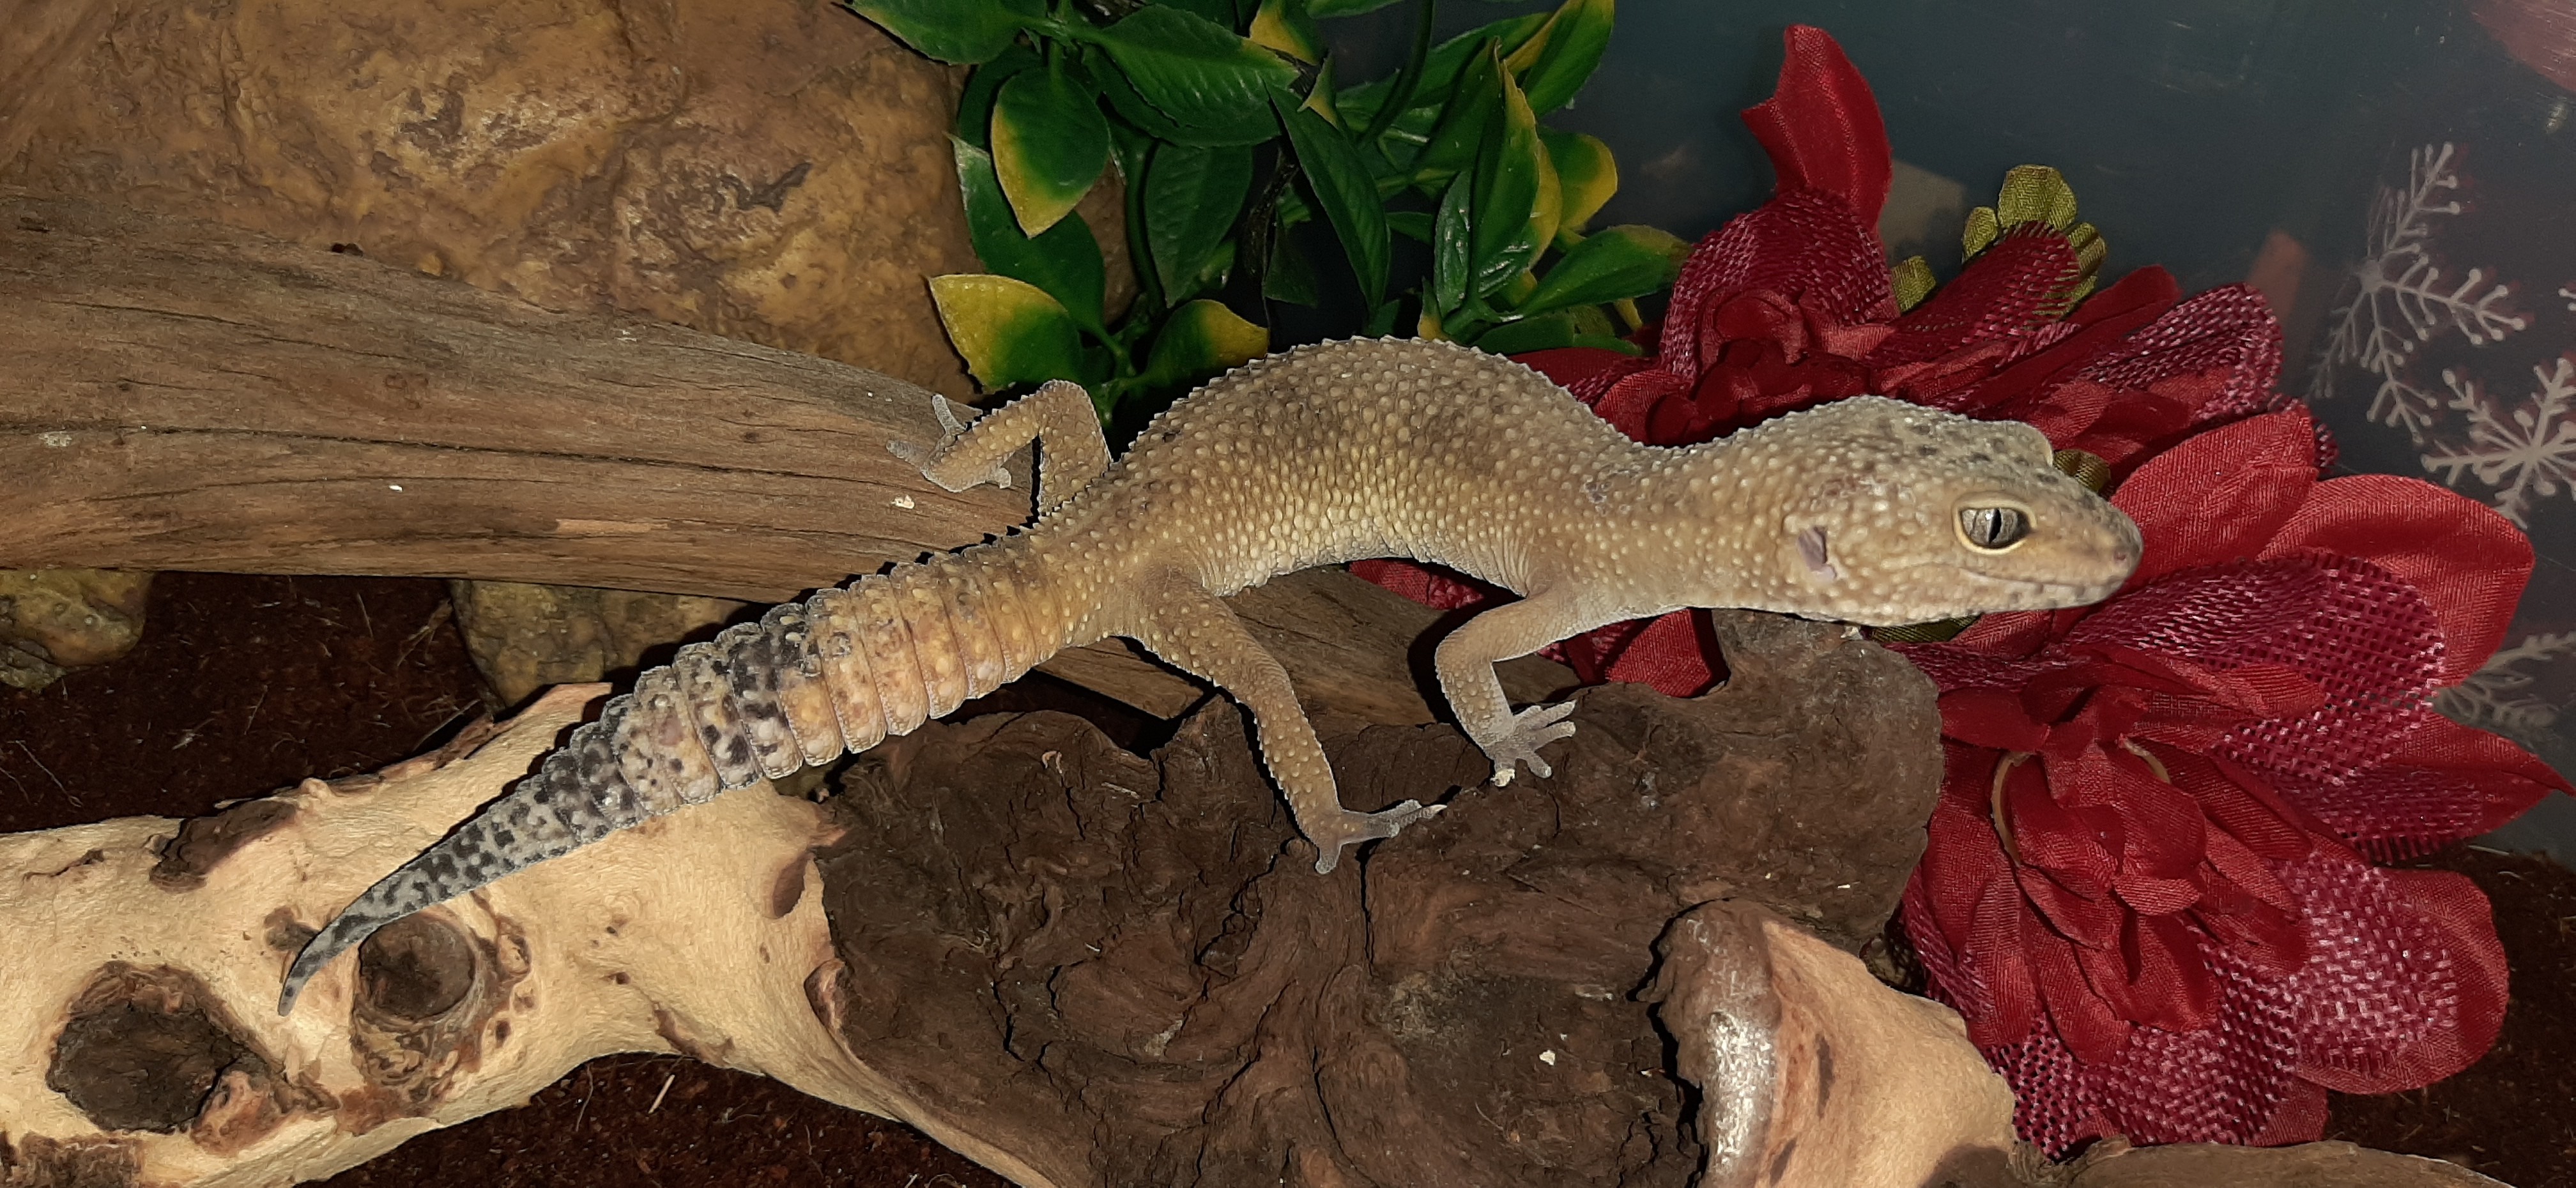 Proven Super Hypo Leopard Gecko by Critter Castle Pets And Supplies